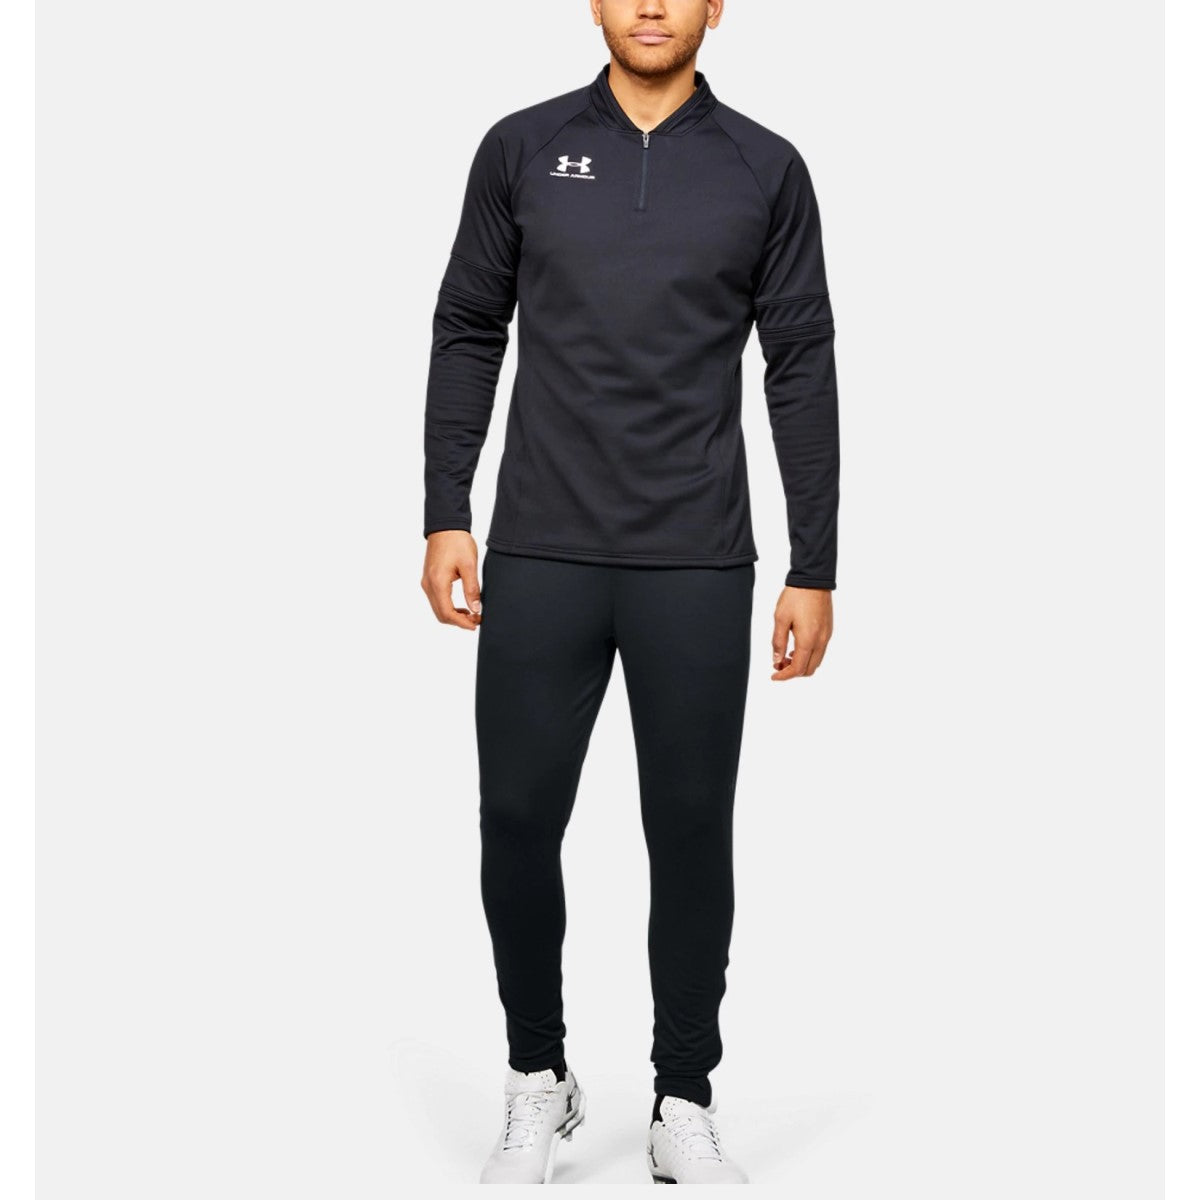 Under Armour Challenger 11 Skinny Training Pants Mens